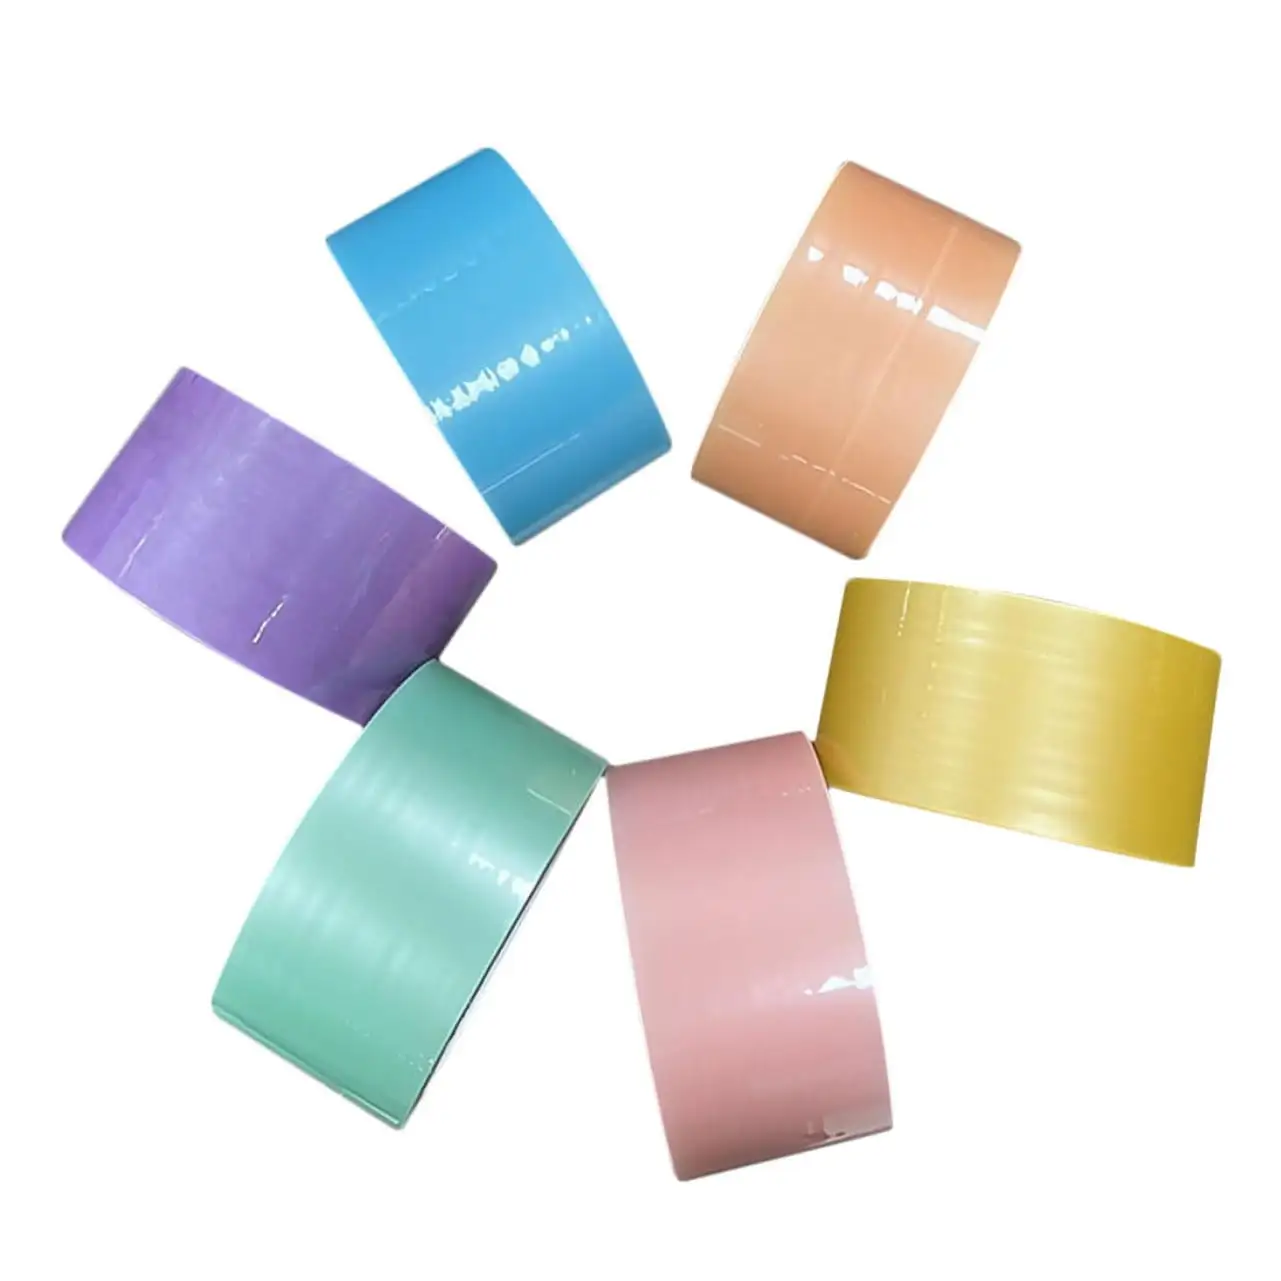 Acrylic Adhesive Double Sided BOPP Ball Tape Waterproof Hit Stress-Relieving Colorful Decompression Masking Tape